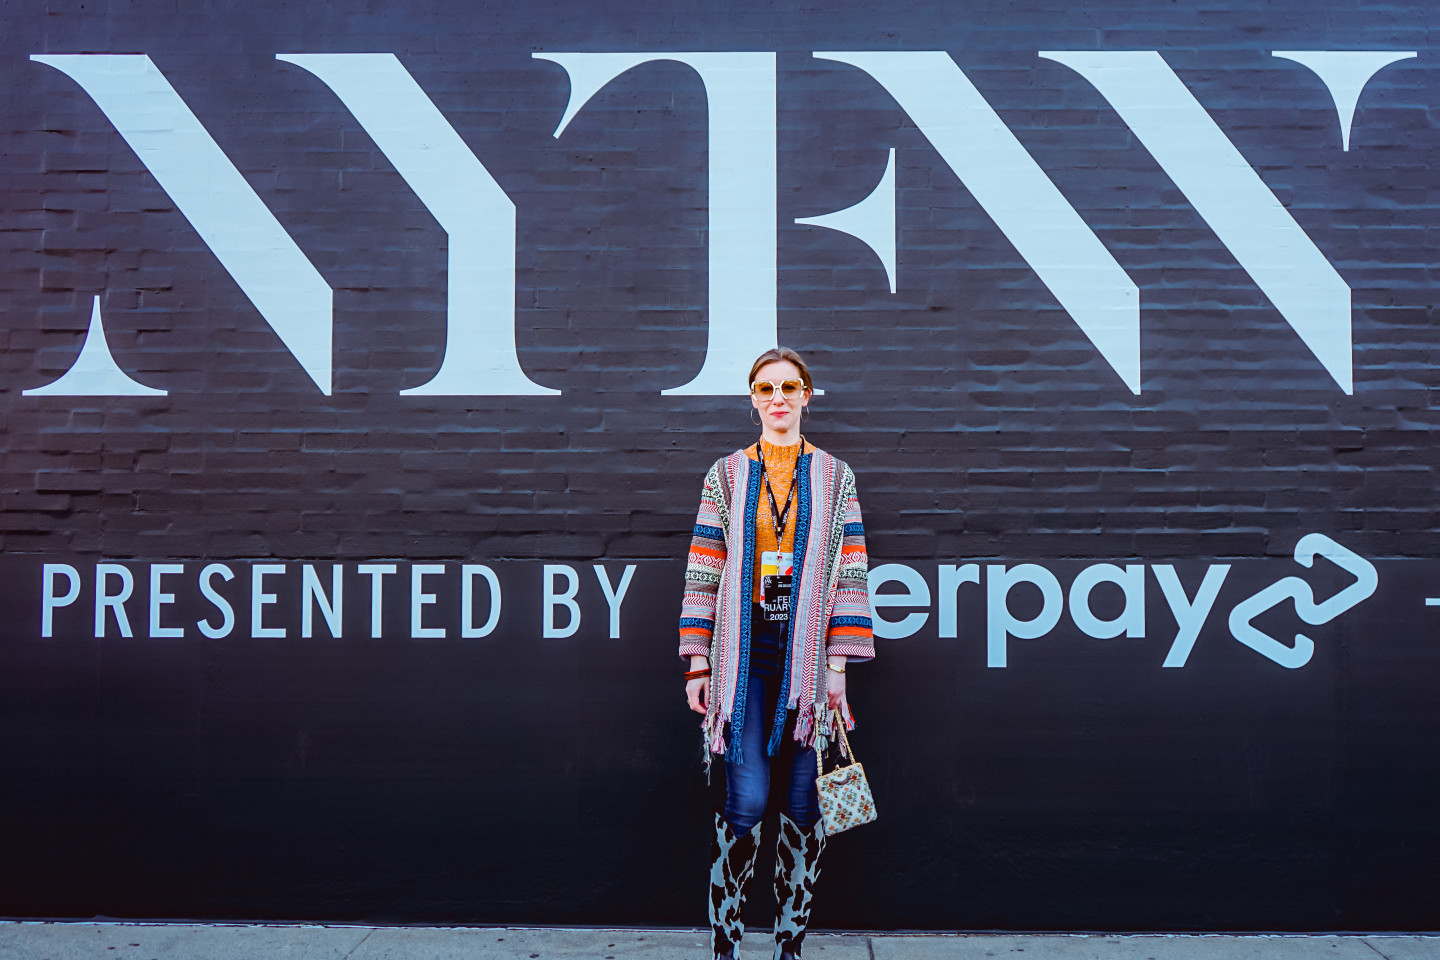 Julia LeKander stands in front of a black wall with white writing on it while attending New York Fashion Week.